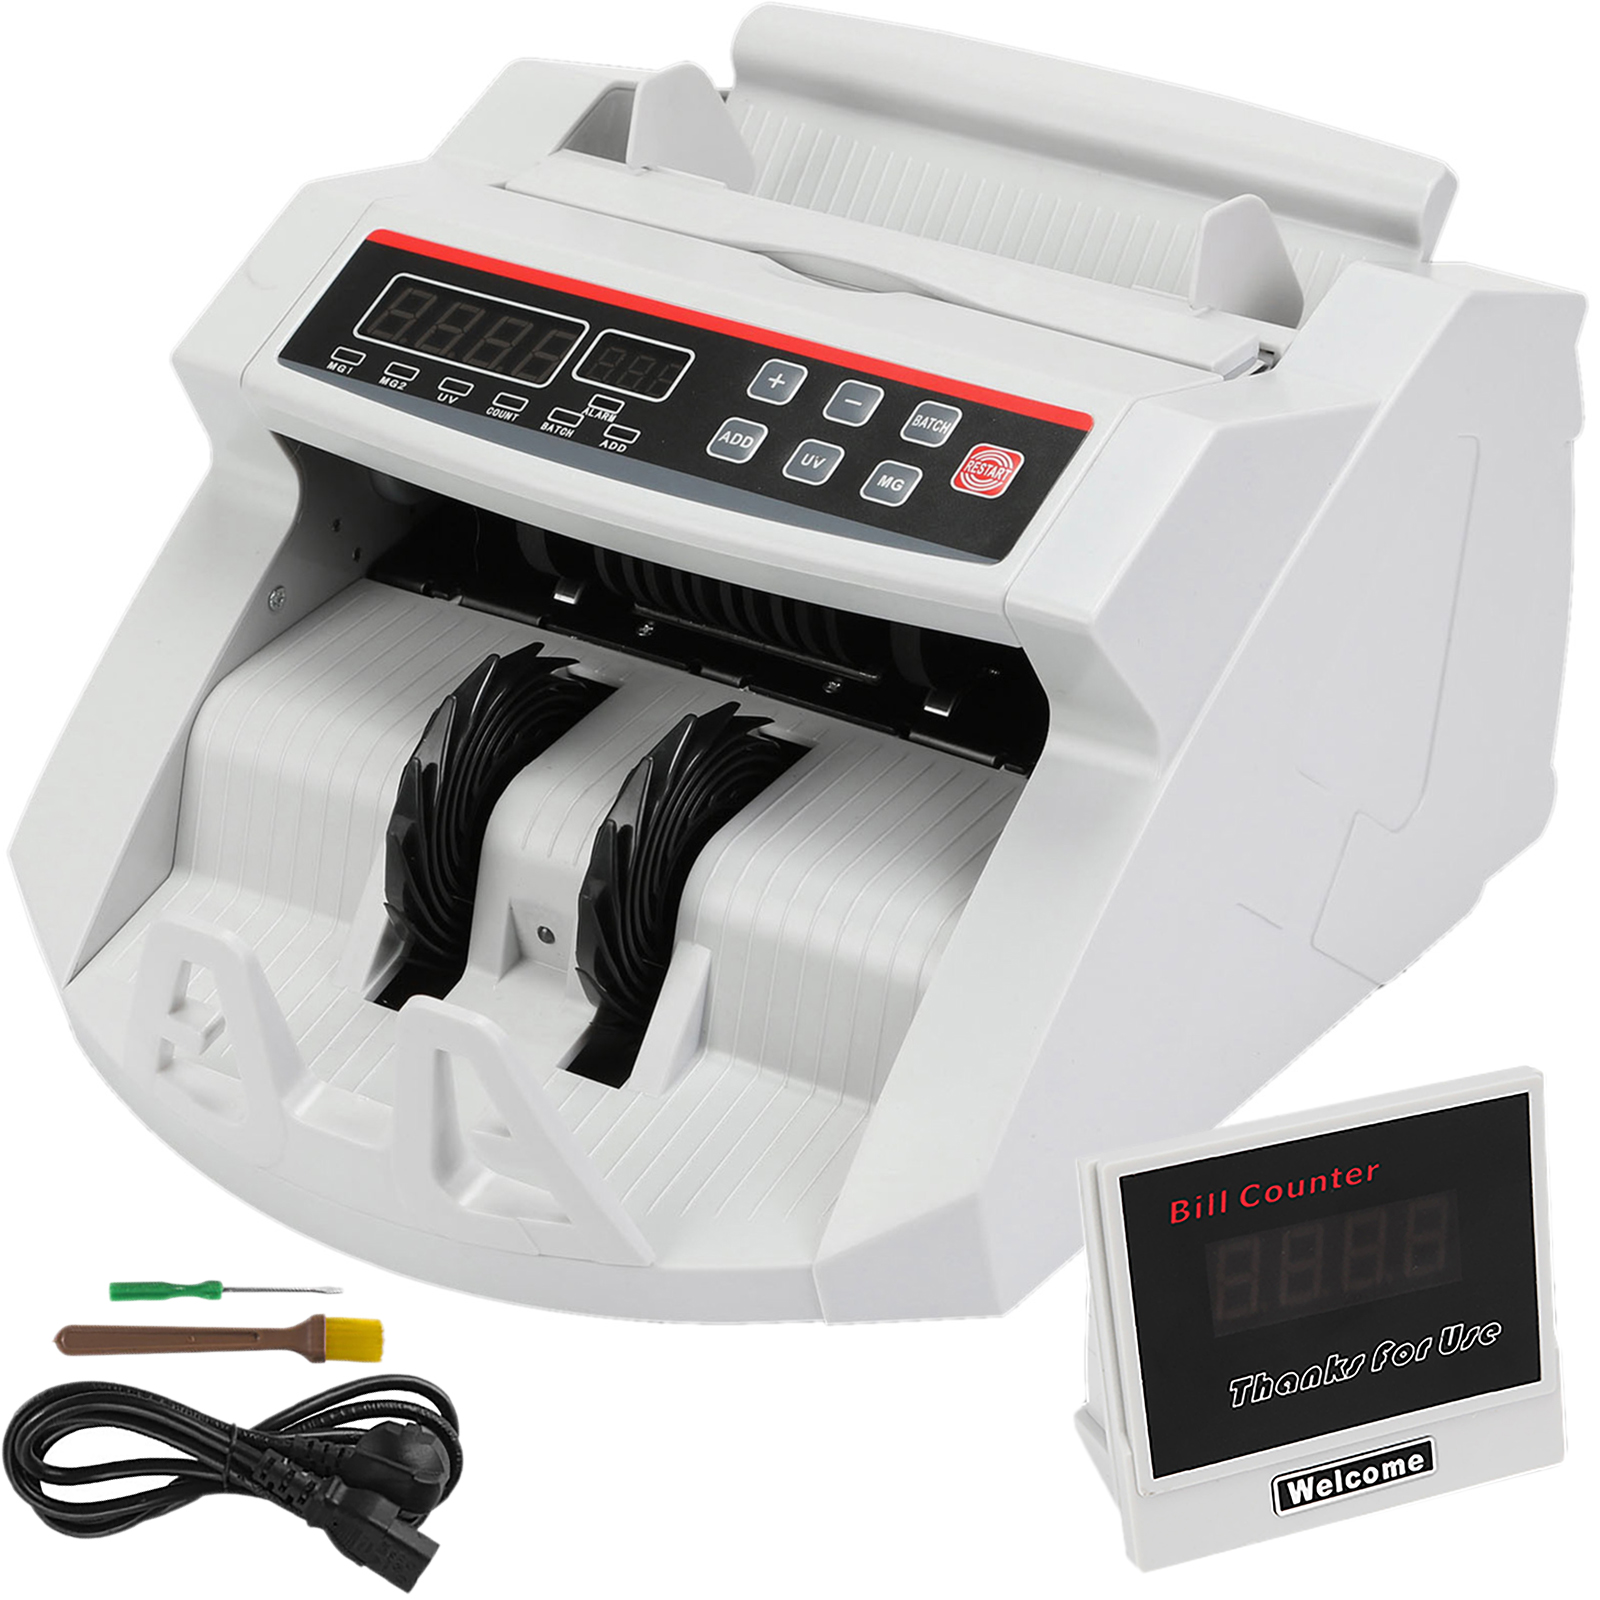 LBSX Money Counter Worldwide Bill Counting Machine Detector UV/MG Counterfeit w/External Display Support Countries Such As US Dollar Money Handling Products Euro Japan British Pound Canada Etc 